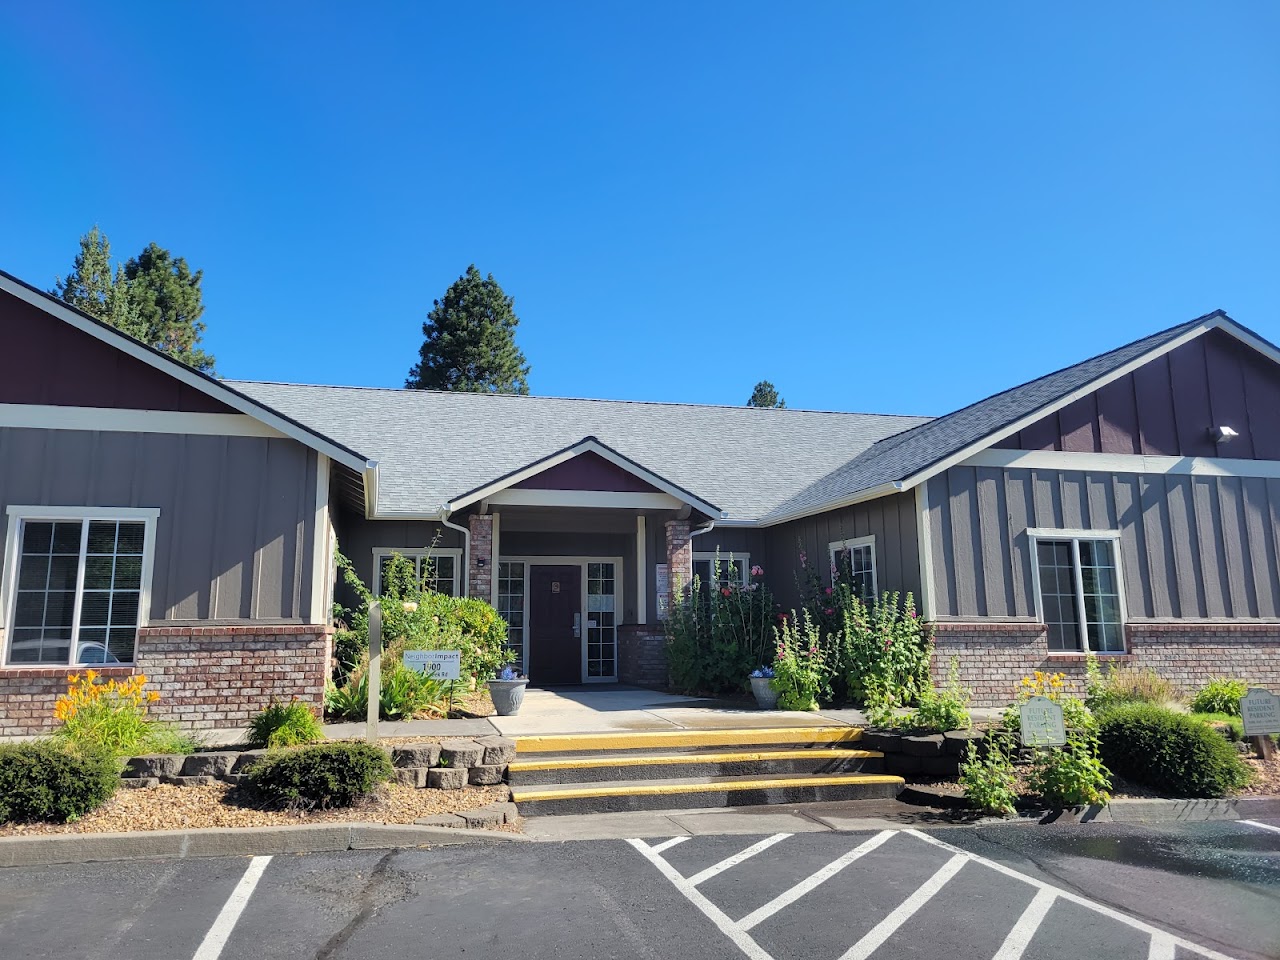 Photo of HEALY HEIGHTS APTS SITE 2 at 1900 NE BEAR CREEK RD BEND, OR 97702